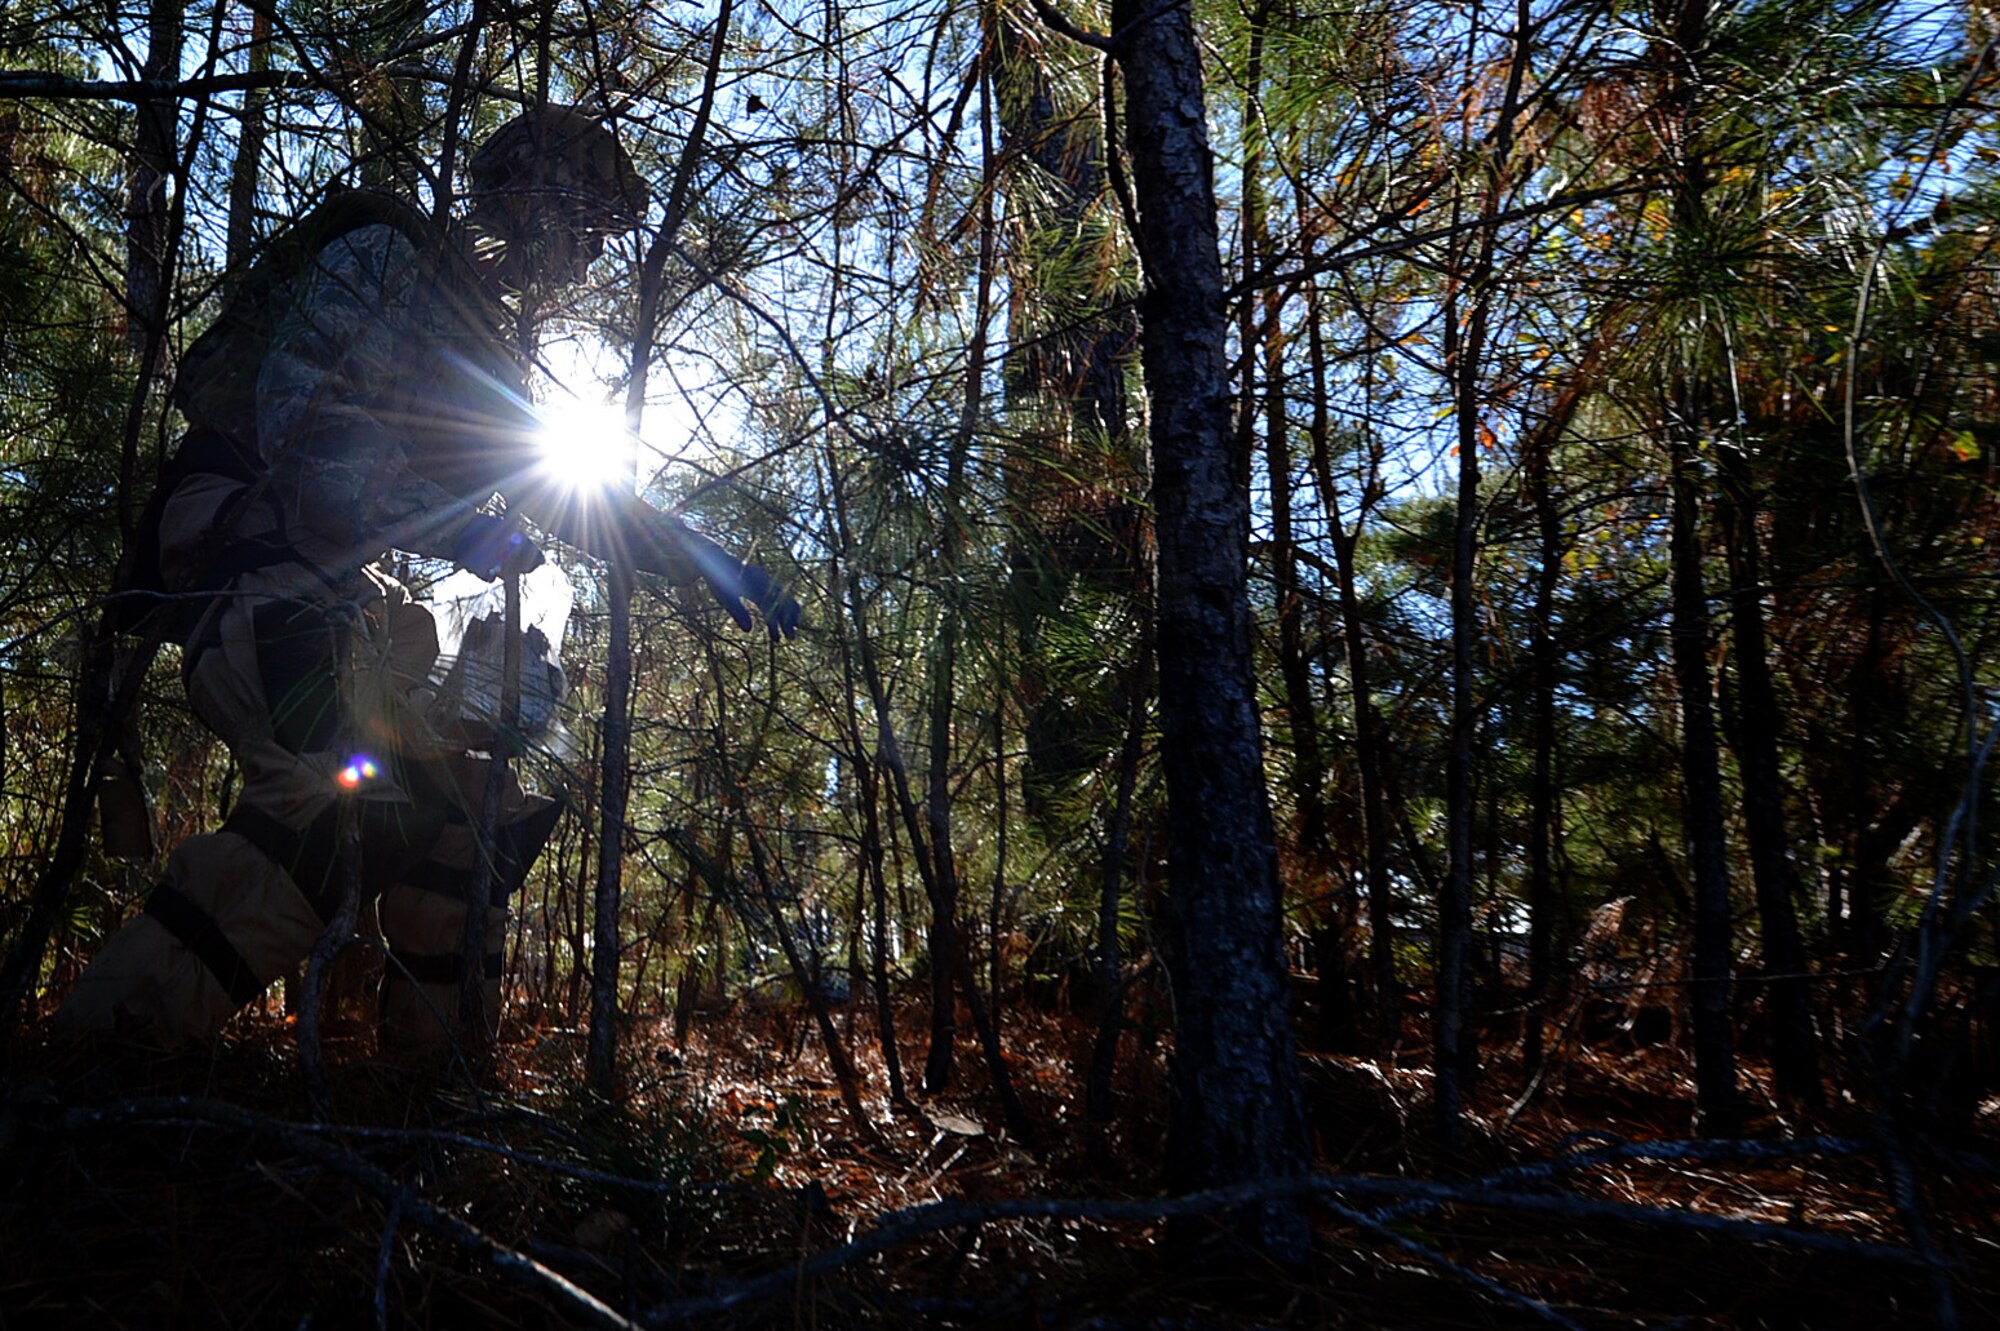 A U.S. Airman assigned to the 20th Civil Engineer Squadron explosive ordnance disposal (EOD) flight searches for dummy improvised explosive device (IED) debris at Shaw Air Force Base, S.C., Dec. 14, 2017.